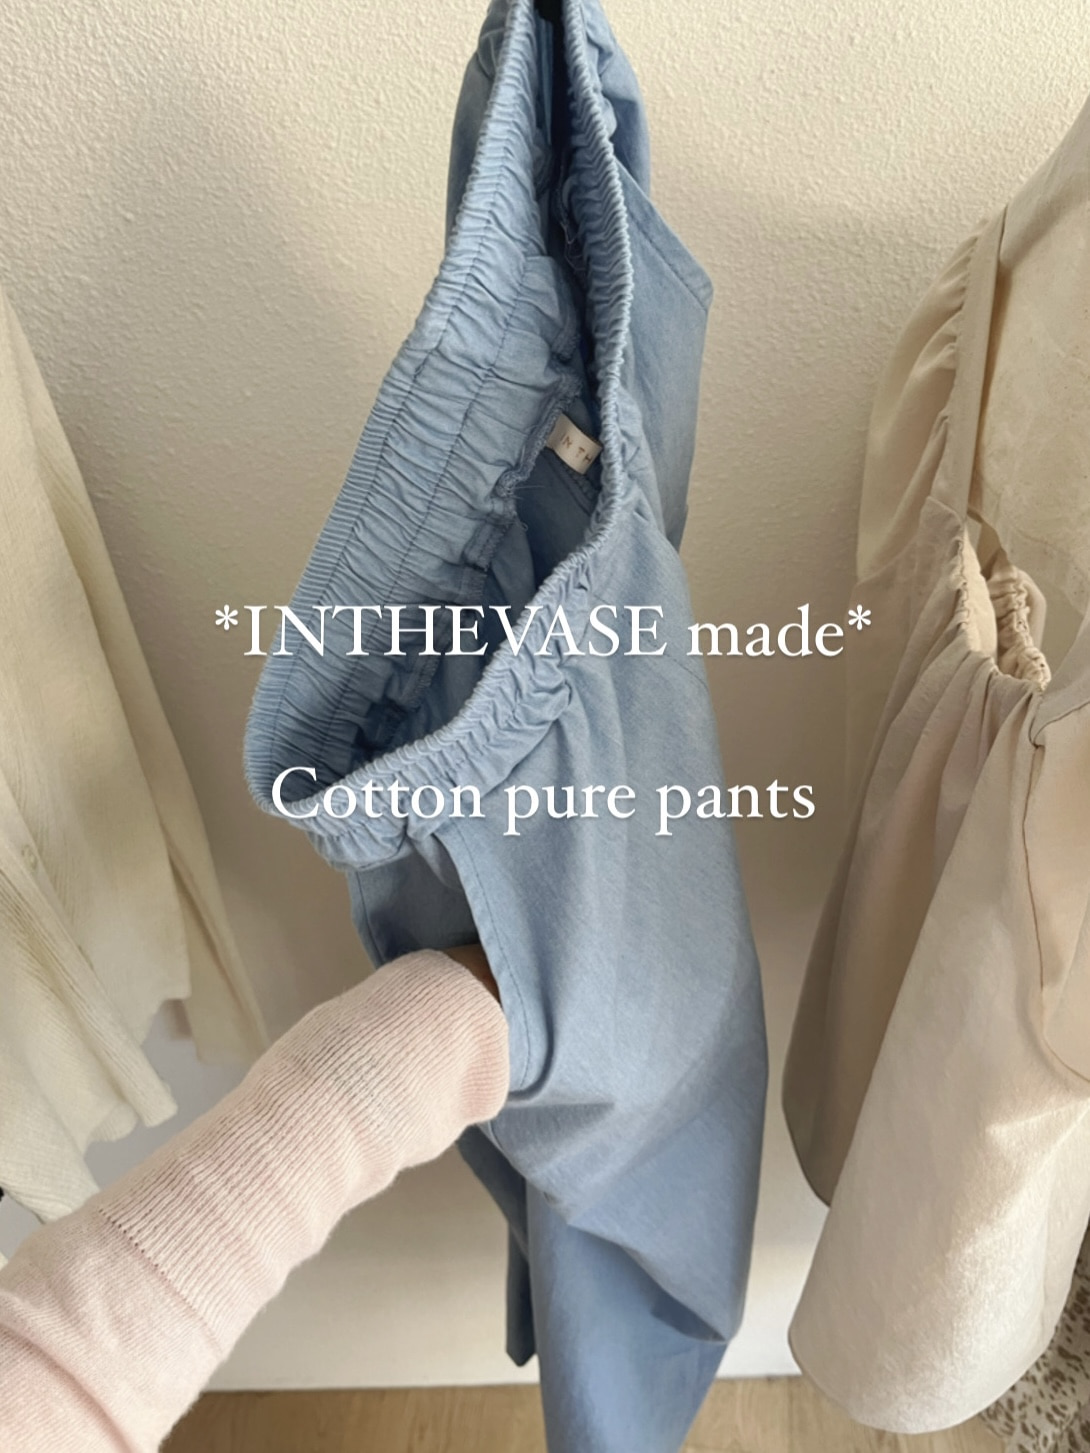 *INTHEVASE made* Cotton pure pants